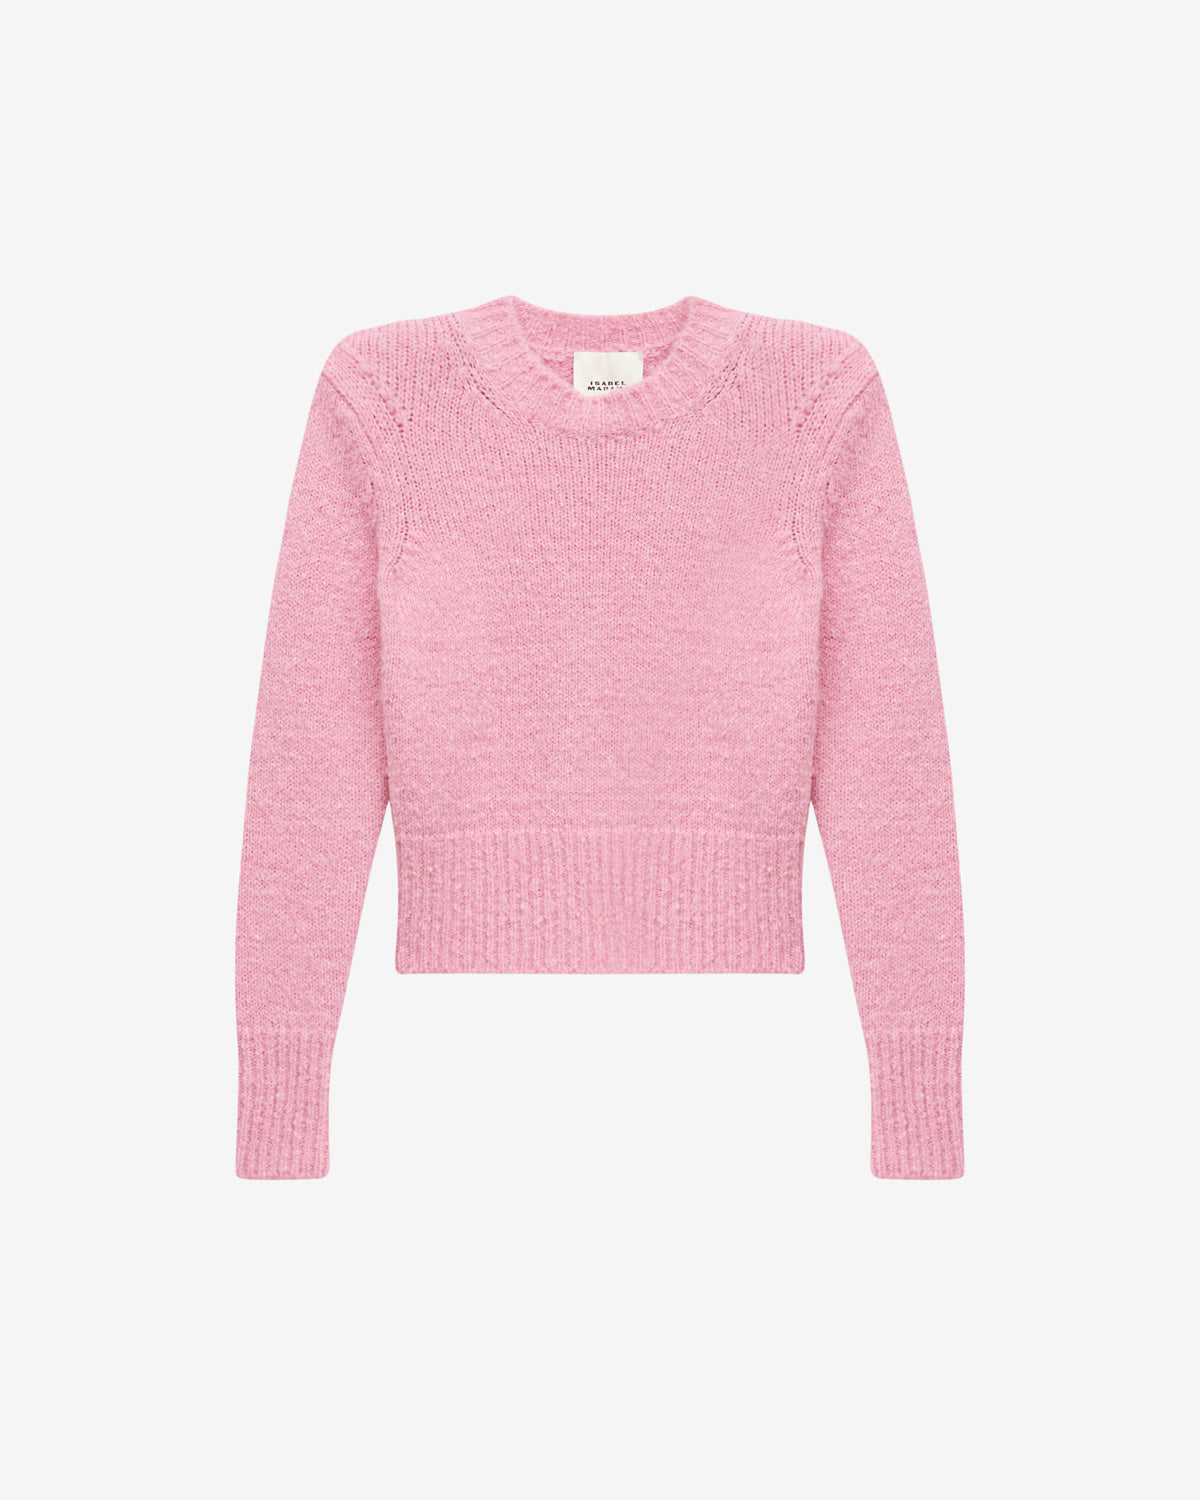 Pullover kalo Woman Light pink 1